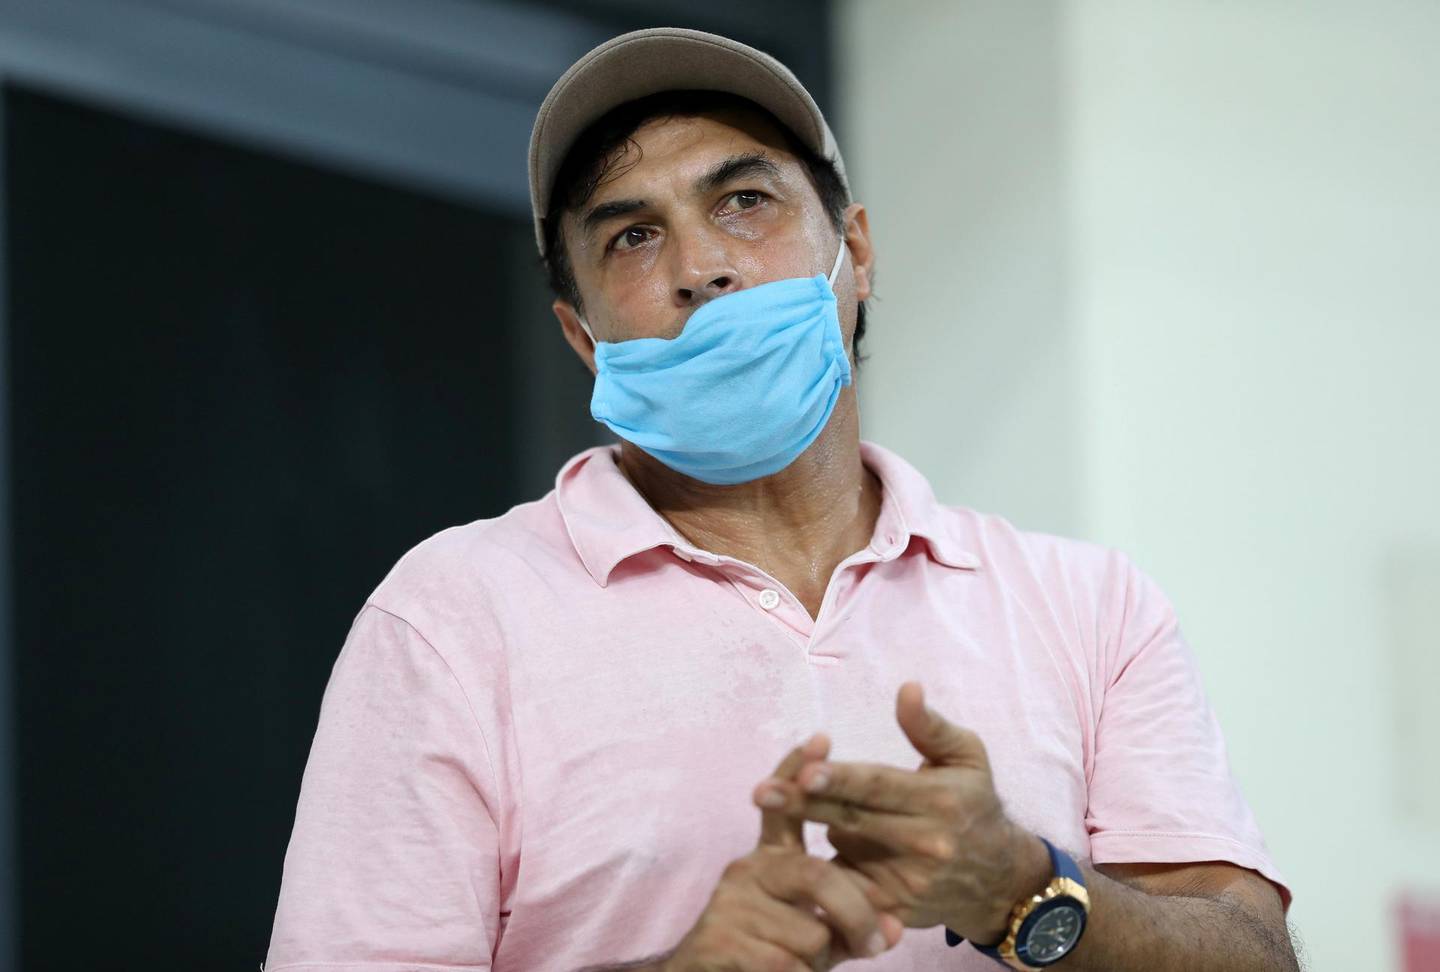 Dubai, United Arab Emirates - Reporter: Paul Radley. Sport. Cricket. UAE coach Robin Singh before the game between ECB Blues and Fujairah in the final of the Emirates D10. Friday, August 7th, 2020. Dubai. Chris Whiteoak / The National